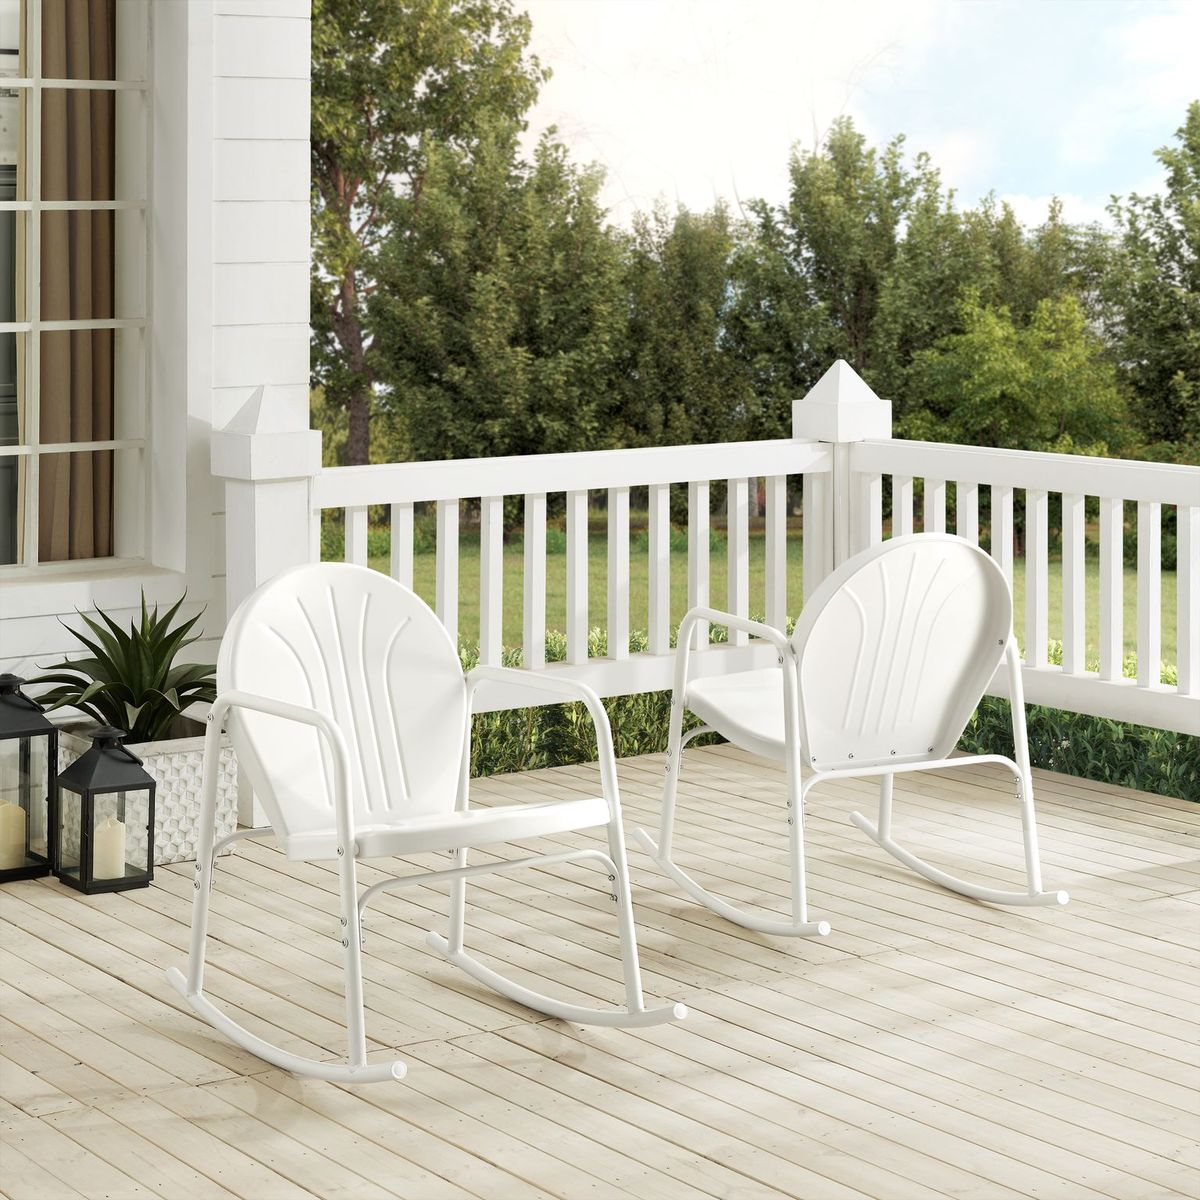 Co1013-wh Outdoor Rocking Chair Set, White Gloss - 2 Chairs - 2 Piece